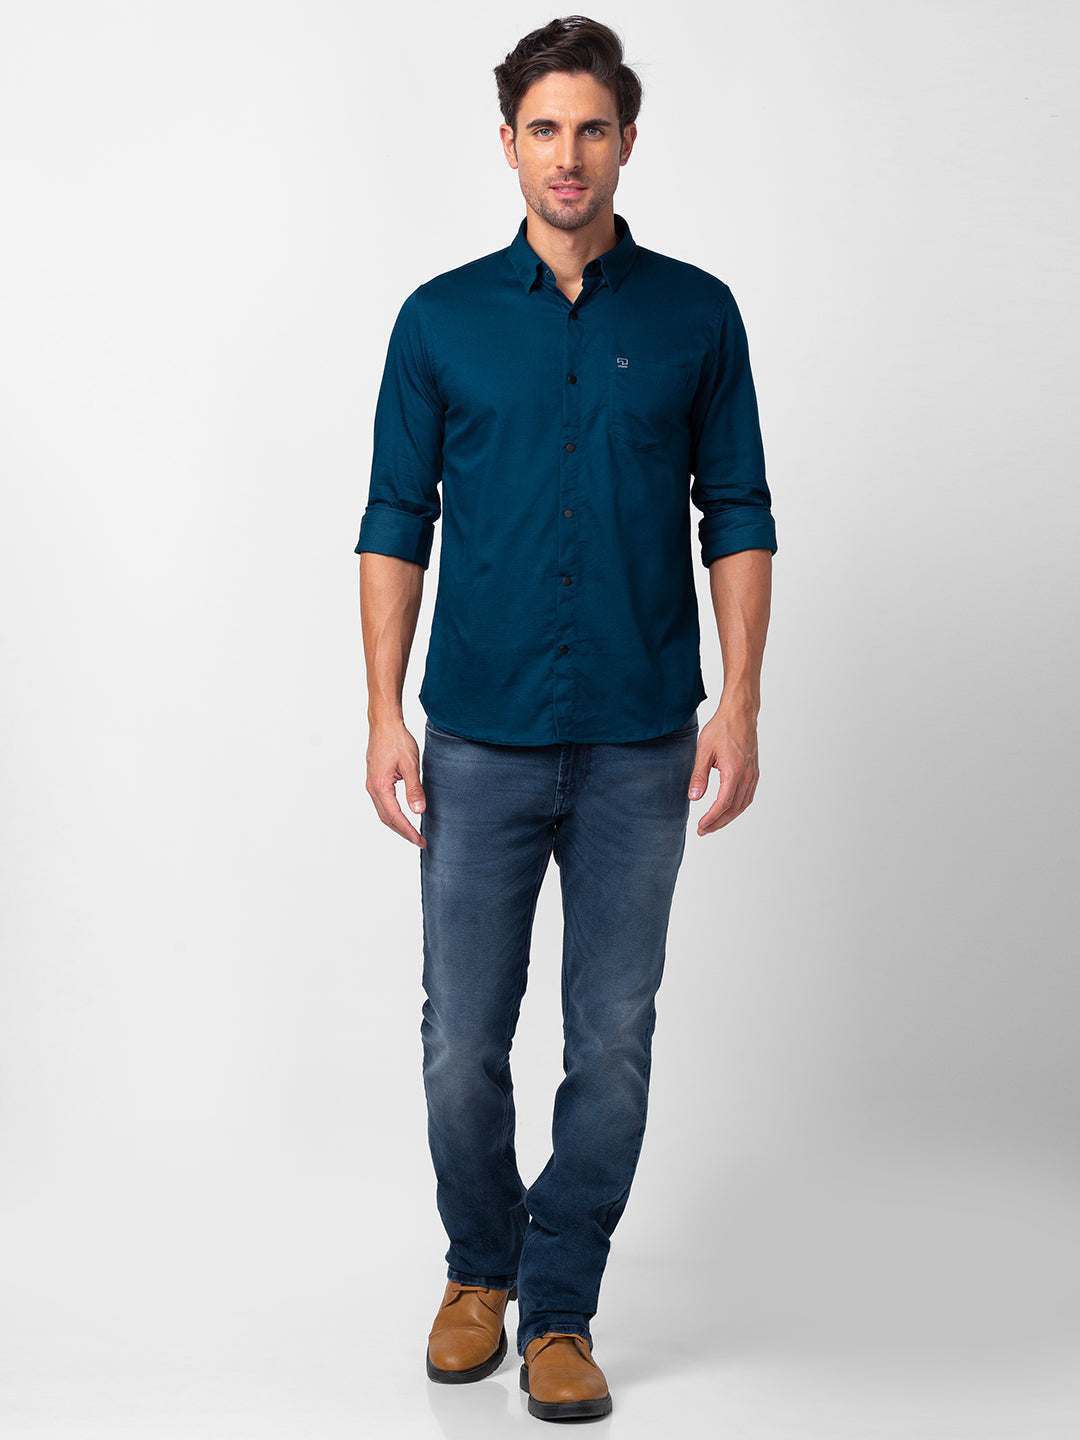 Navy Blue Shirt With Matching Pants matchingpantshirt  Best Color  Combinations  by Look Stylish  YouTube